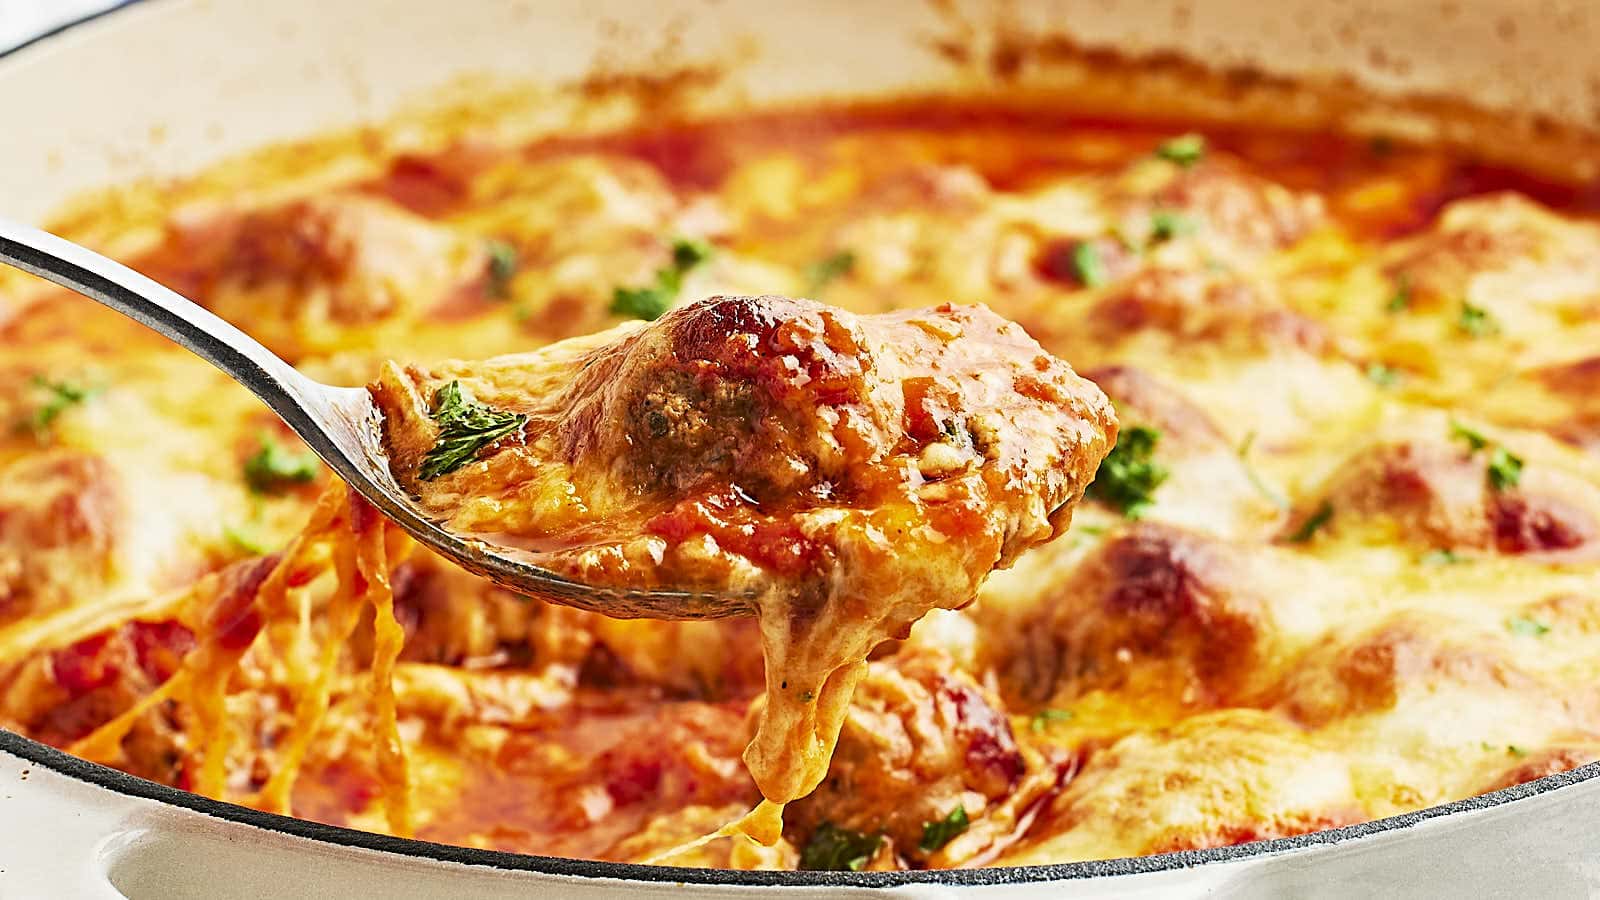 <p>This Cheesy Meatball Casserole is a hit at any dinner table, full of rich, hearty flavors that will make everyone come back for seconds. It's made with juicy meatballs, a savory marinara sauce, and topped off with a layer of gooey, melted cheese.</p><p><strong>Get the Recipe: <a href="https://cheerfulcook.com/cheesy-meatball-casserole/" rel="noreferrer noopener">Meatball Casserole</a></strong></p>